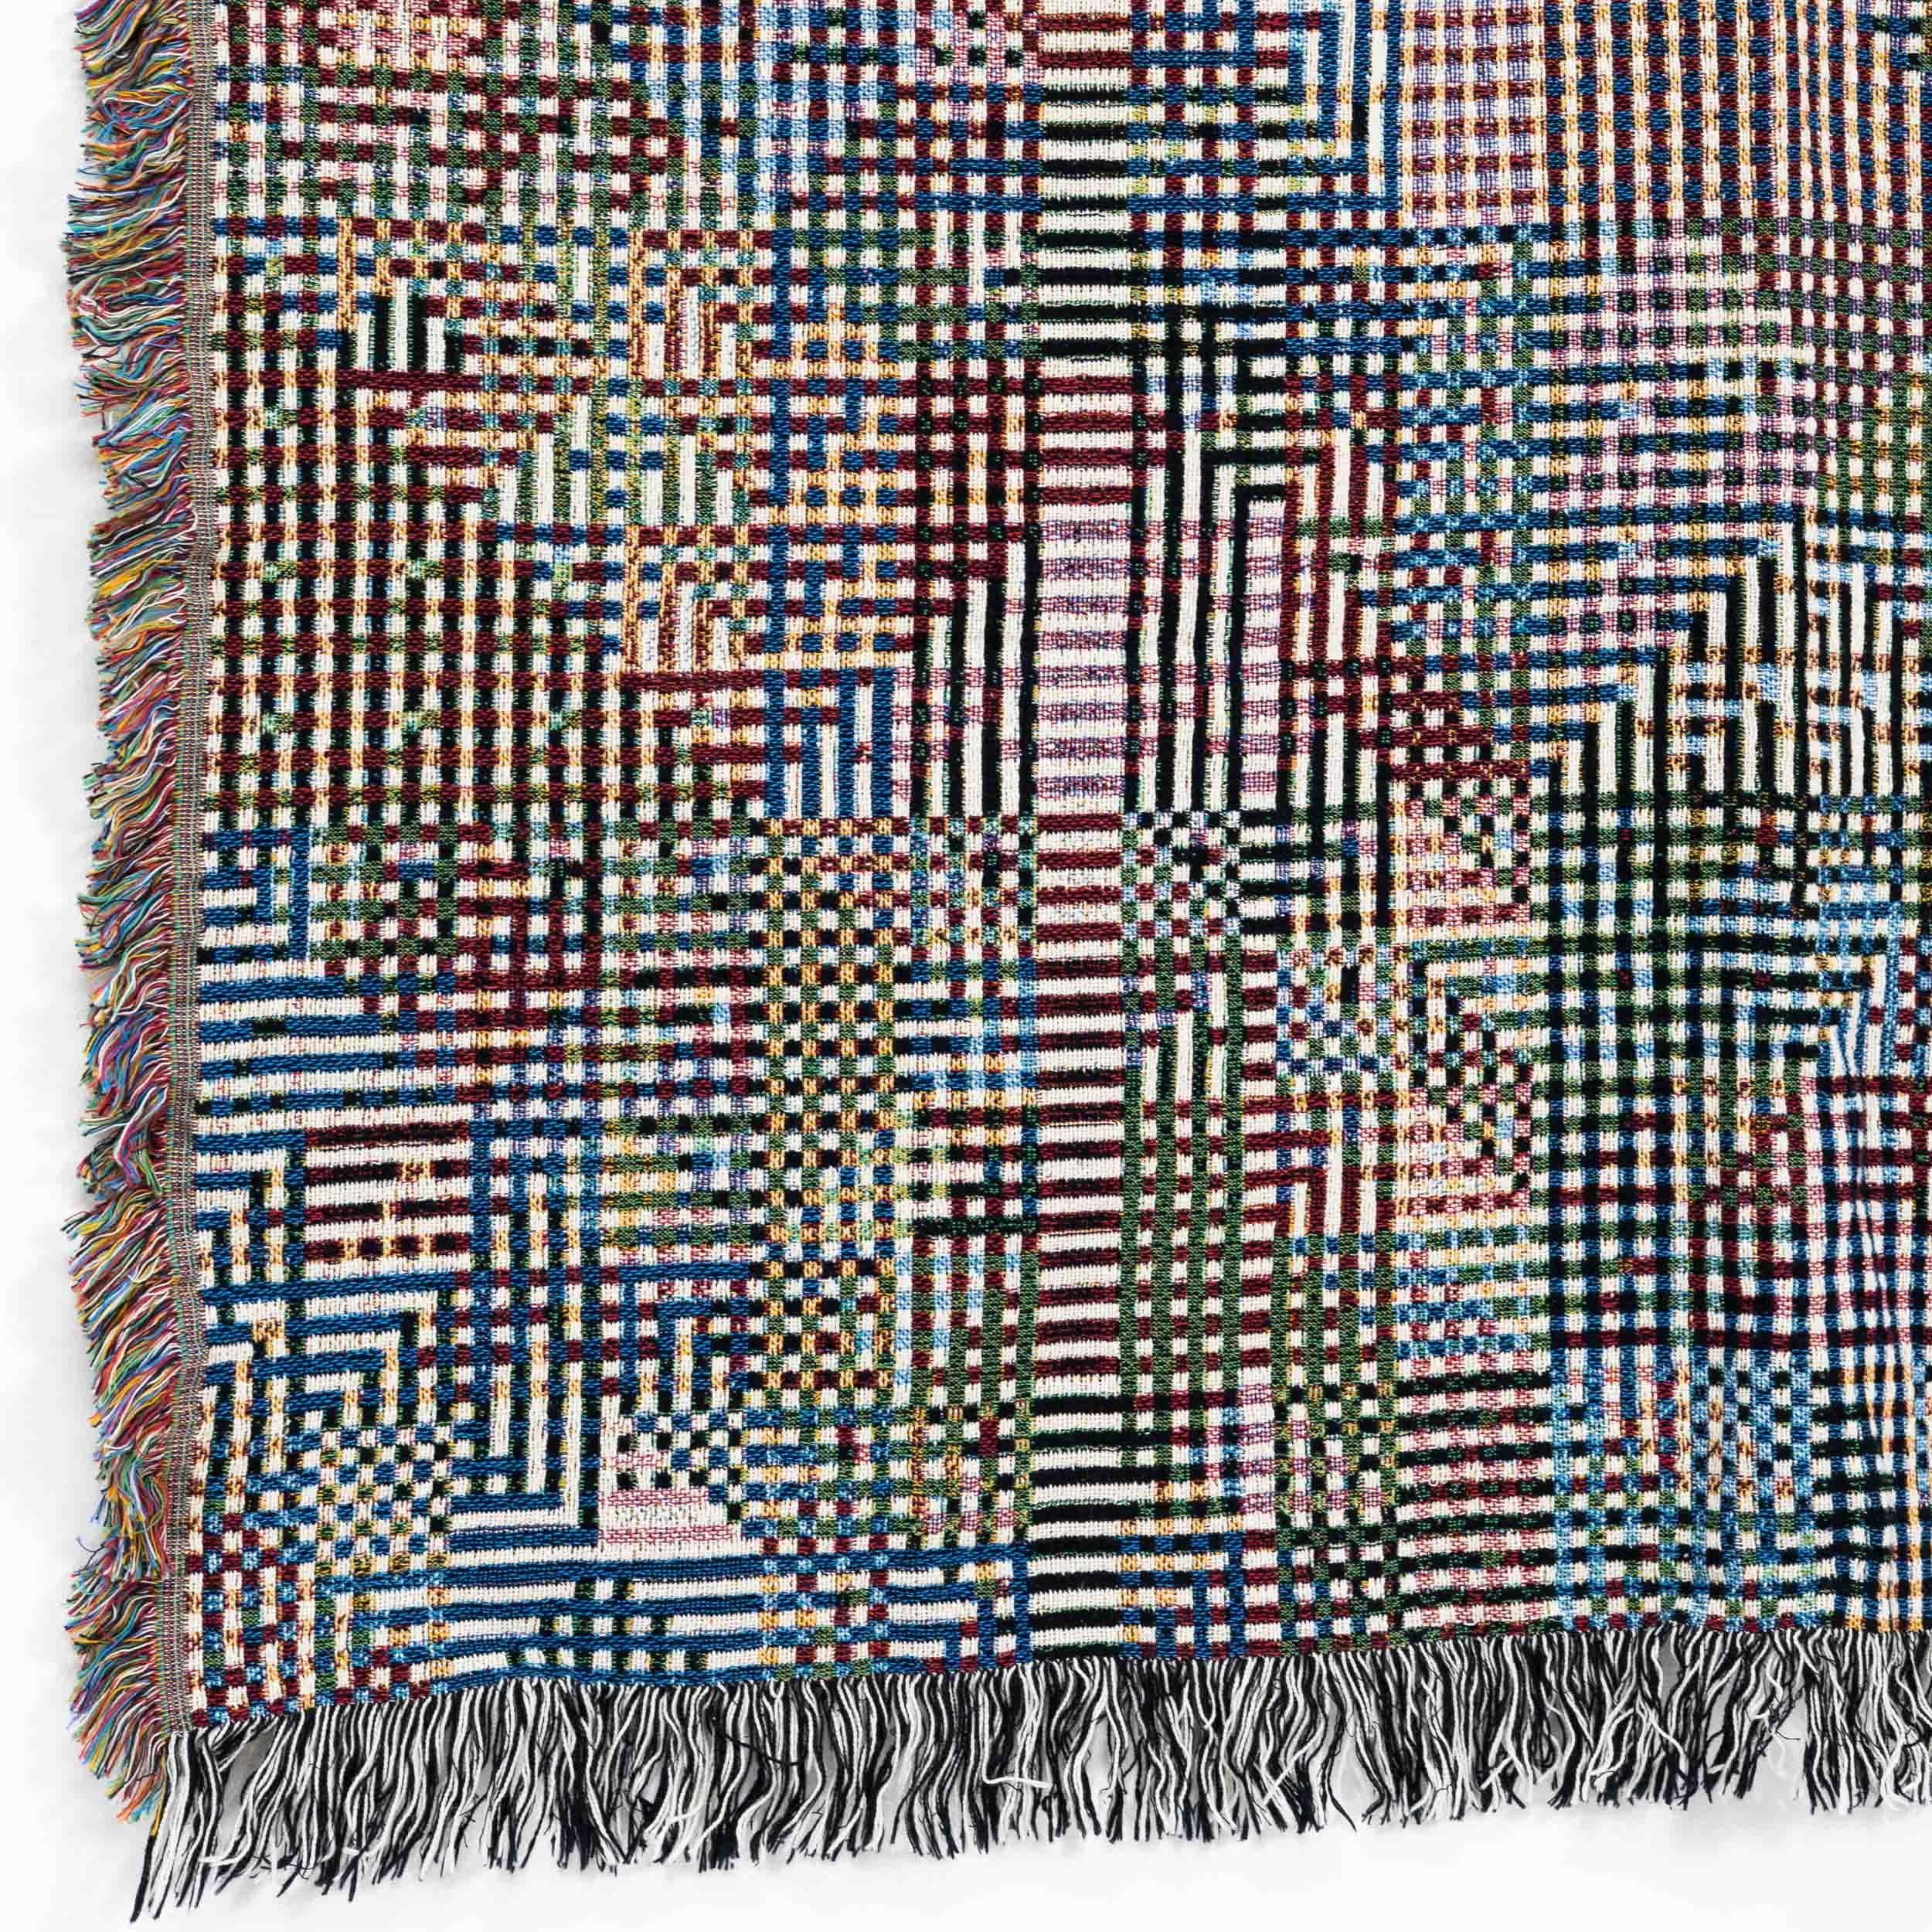 Bit Map 01, Luft Tanaka, Multicolor Graphic Woven Cotton Throw Blanket, 60